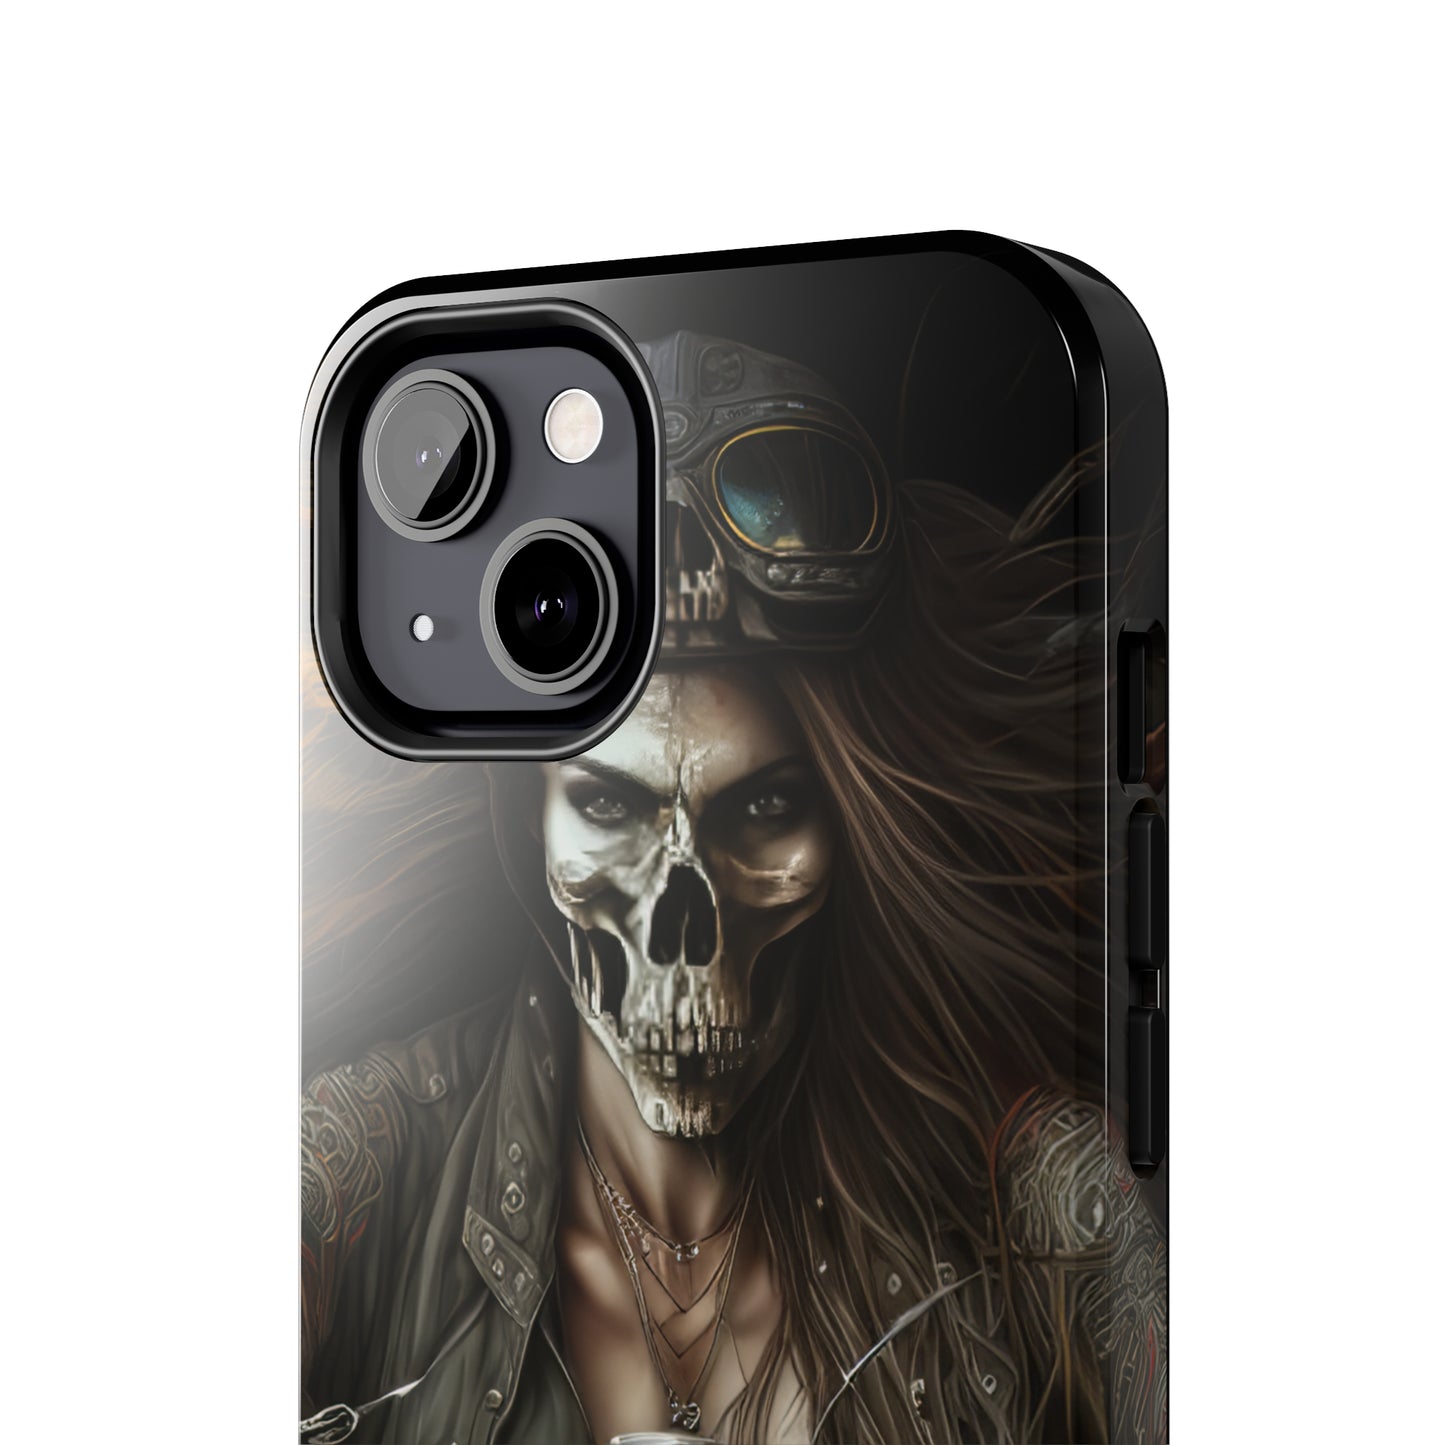 Skull Motorcycle Rider, Ready to Tear Up Road On Beautiful Bike 10 Tough Phone Cases